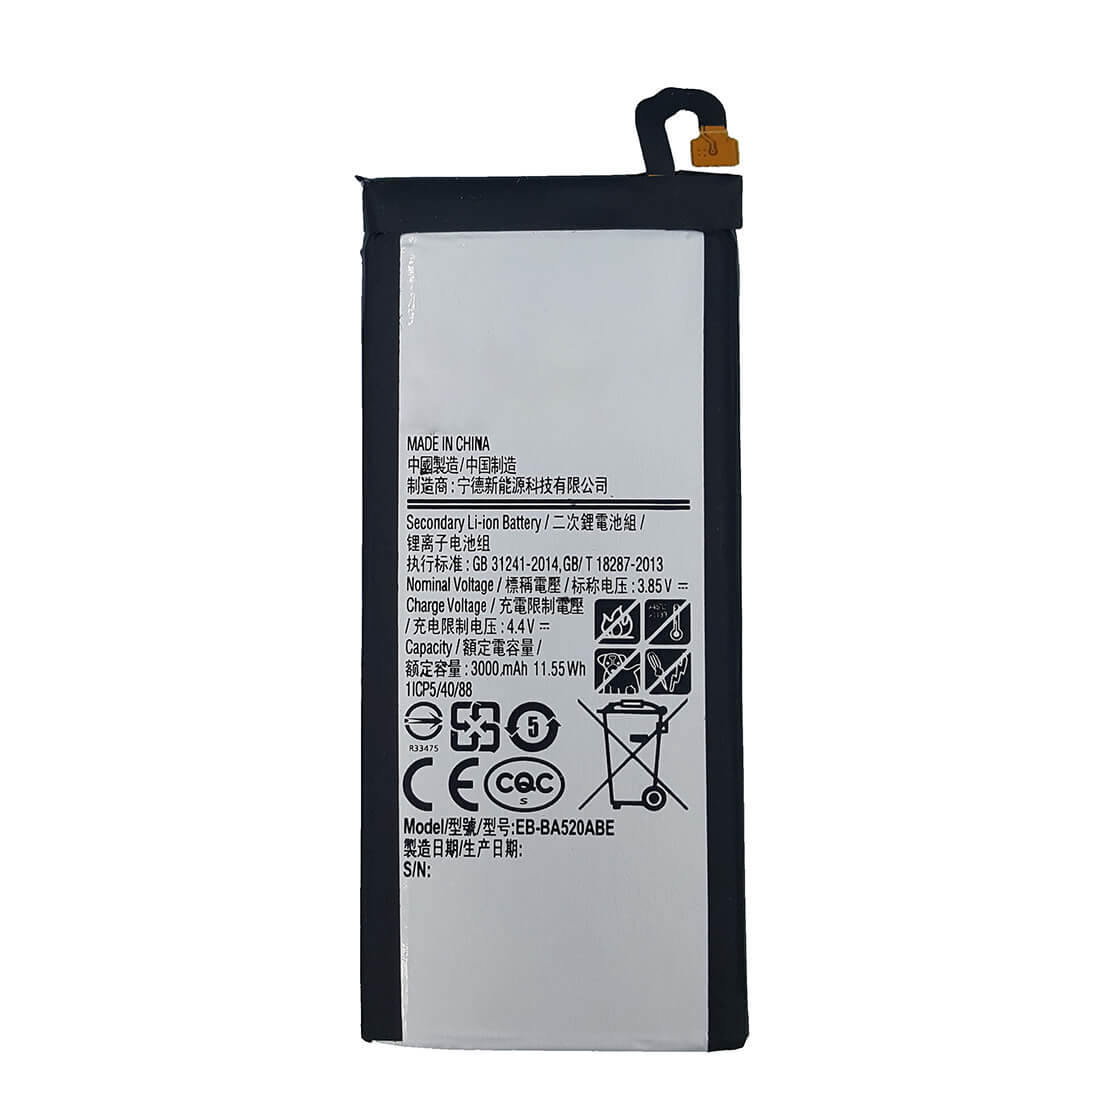 Replacement Battery For Samsung Galaxy J5 2017 - EB-BA520ABE